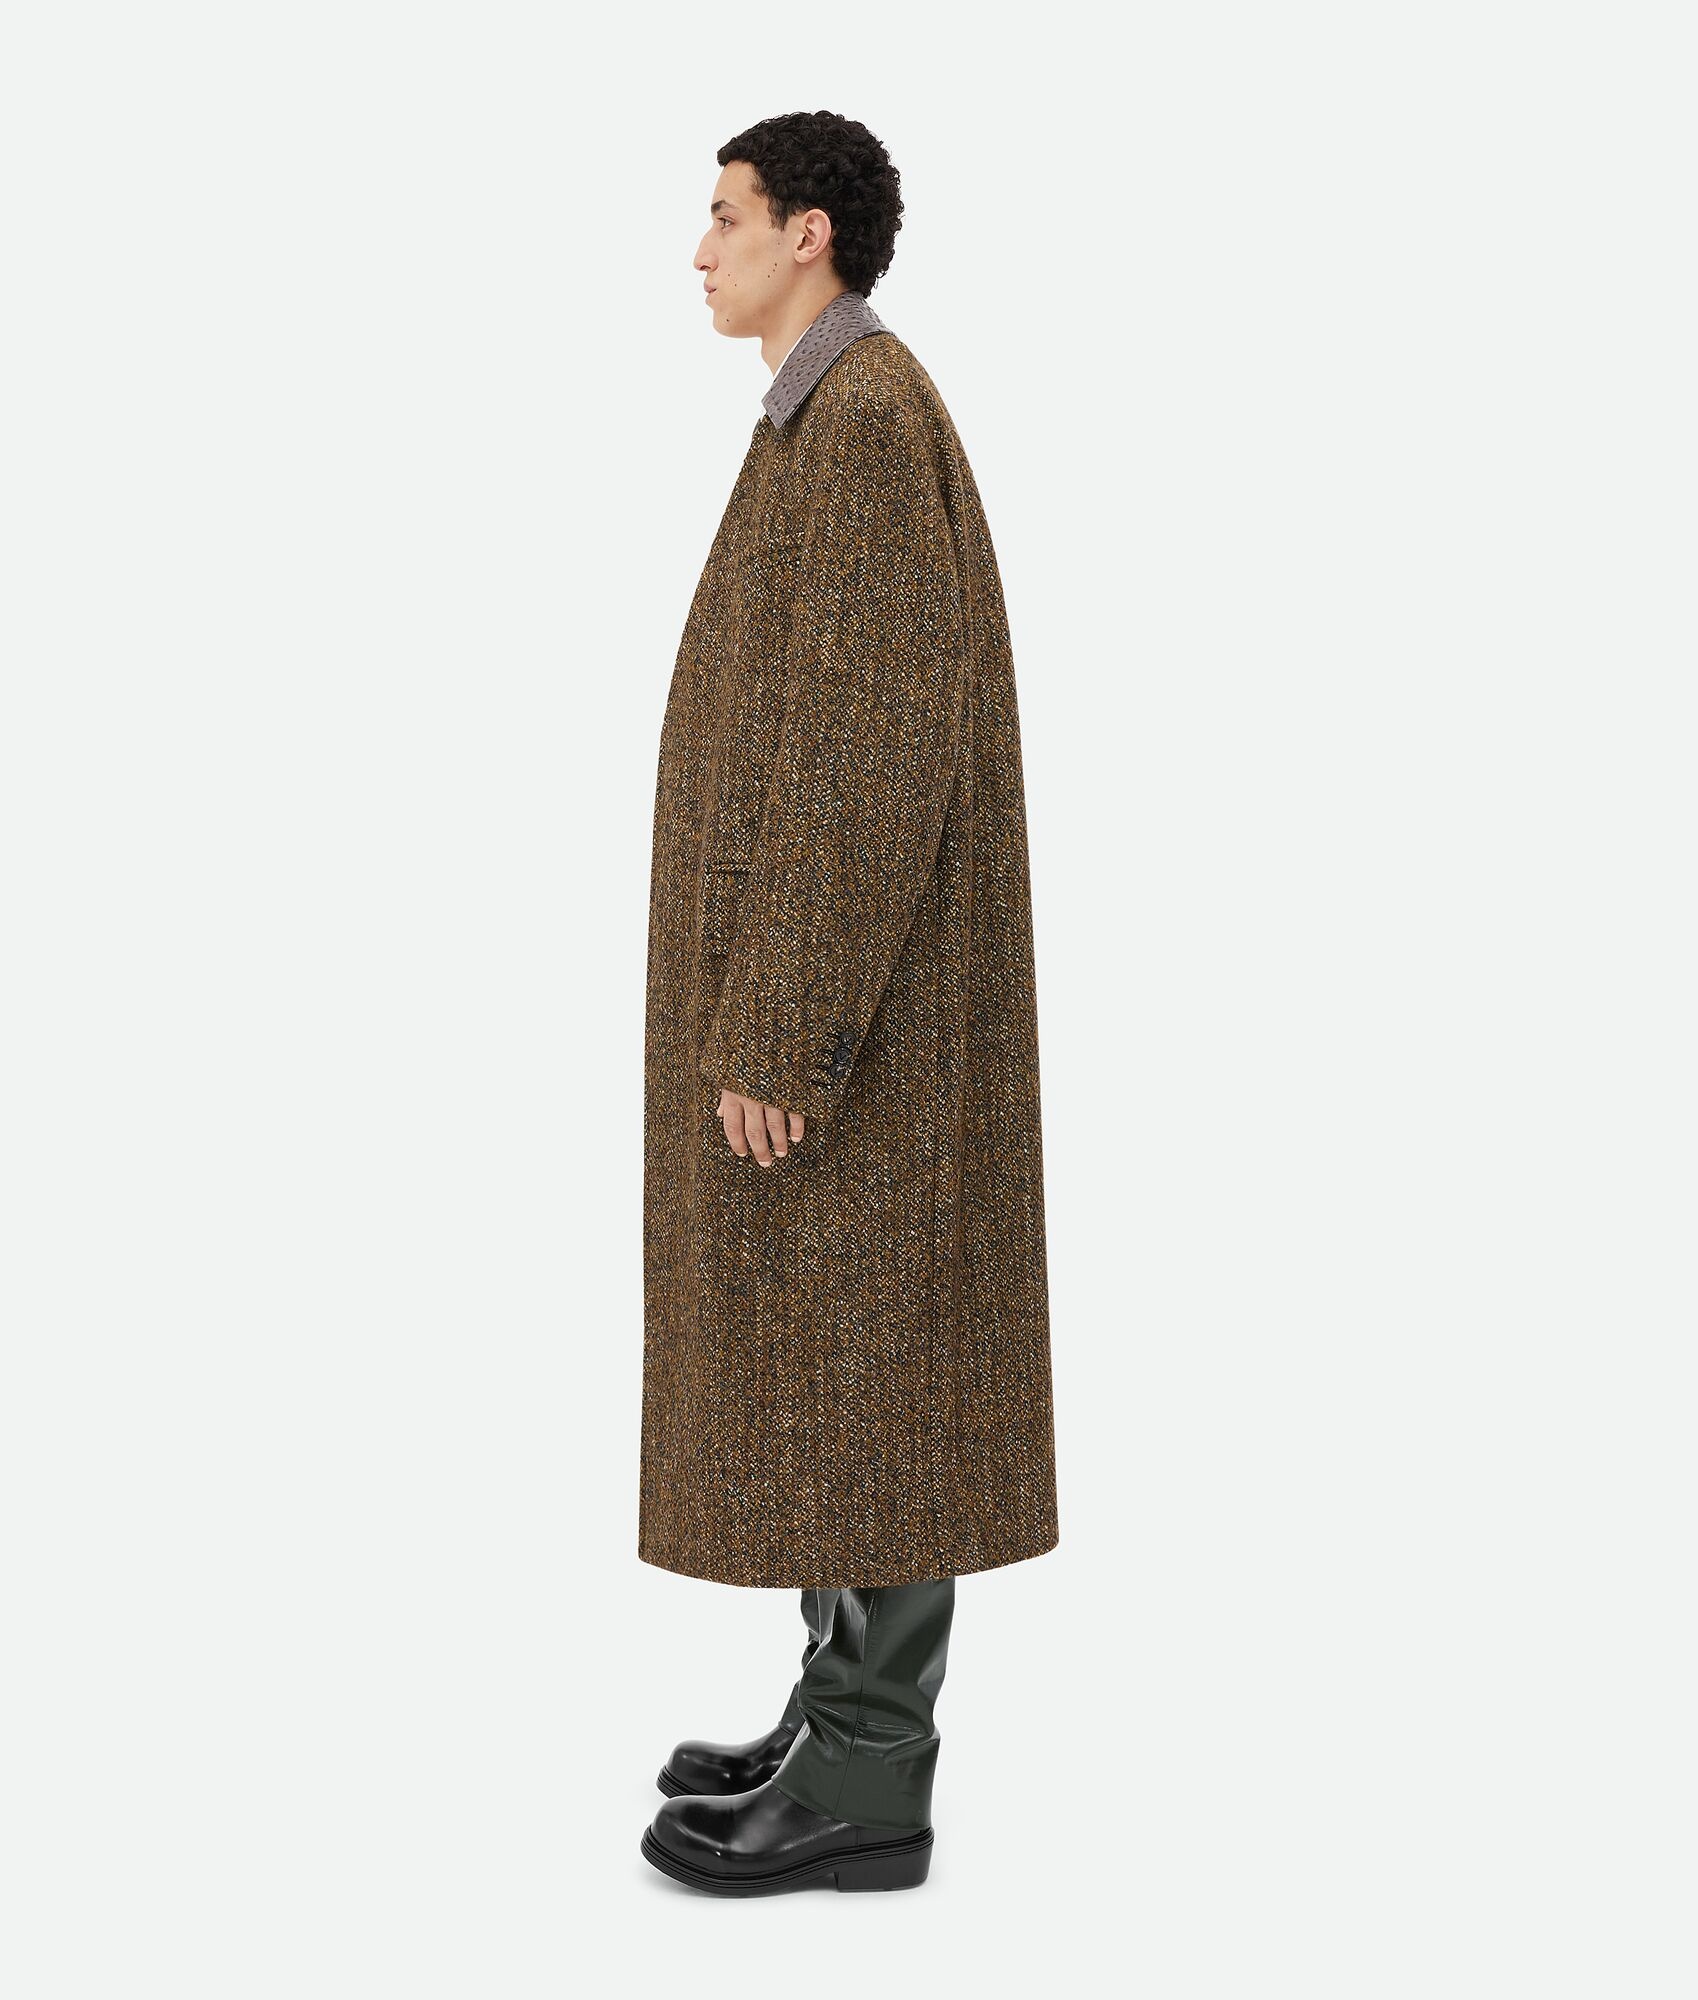 Textured Wool Speckled Coat With Leather Collar - 2